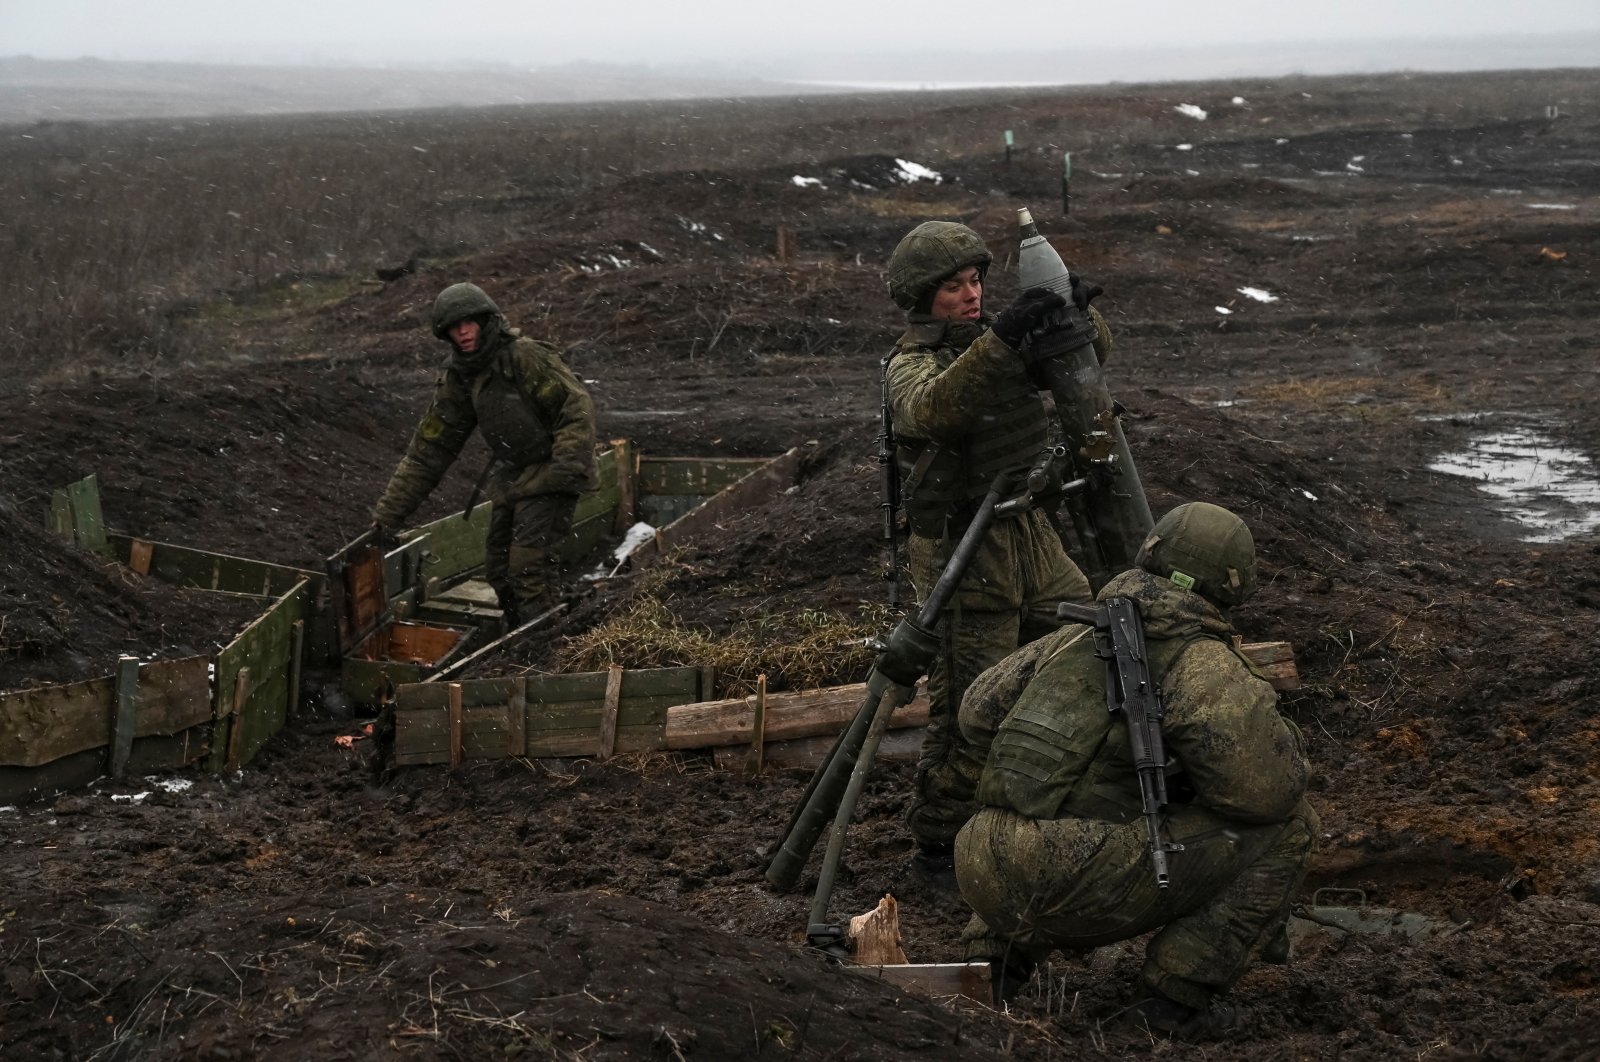 Russian army service members prepare to fire a mortar shell during drills at the Kuzminsky range in the southern Rostov region, Russia, Jan. 21, 2022. (Reuters Photo)